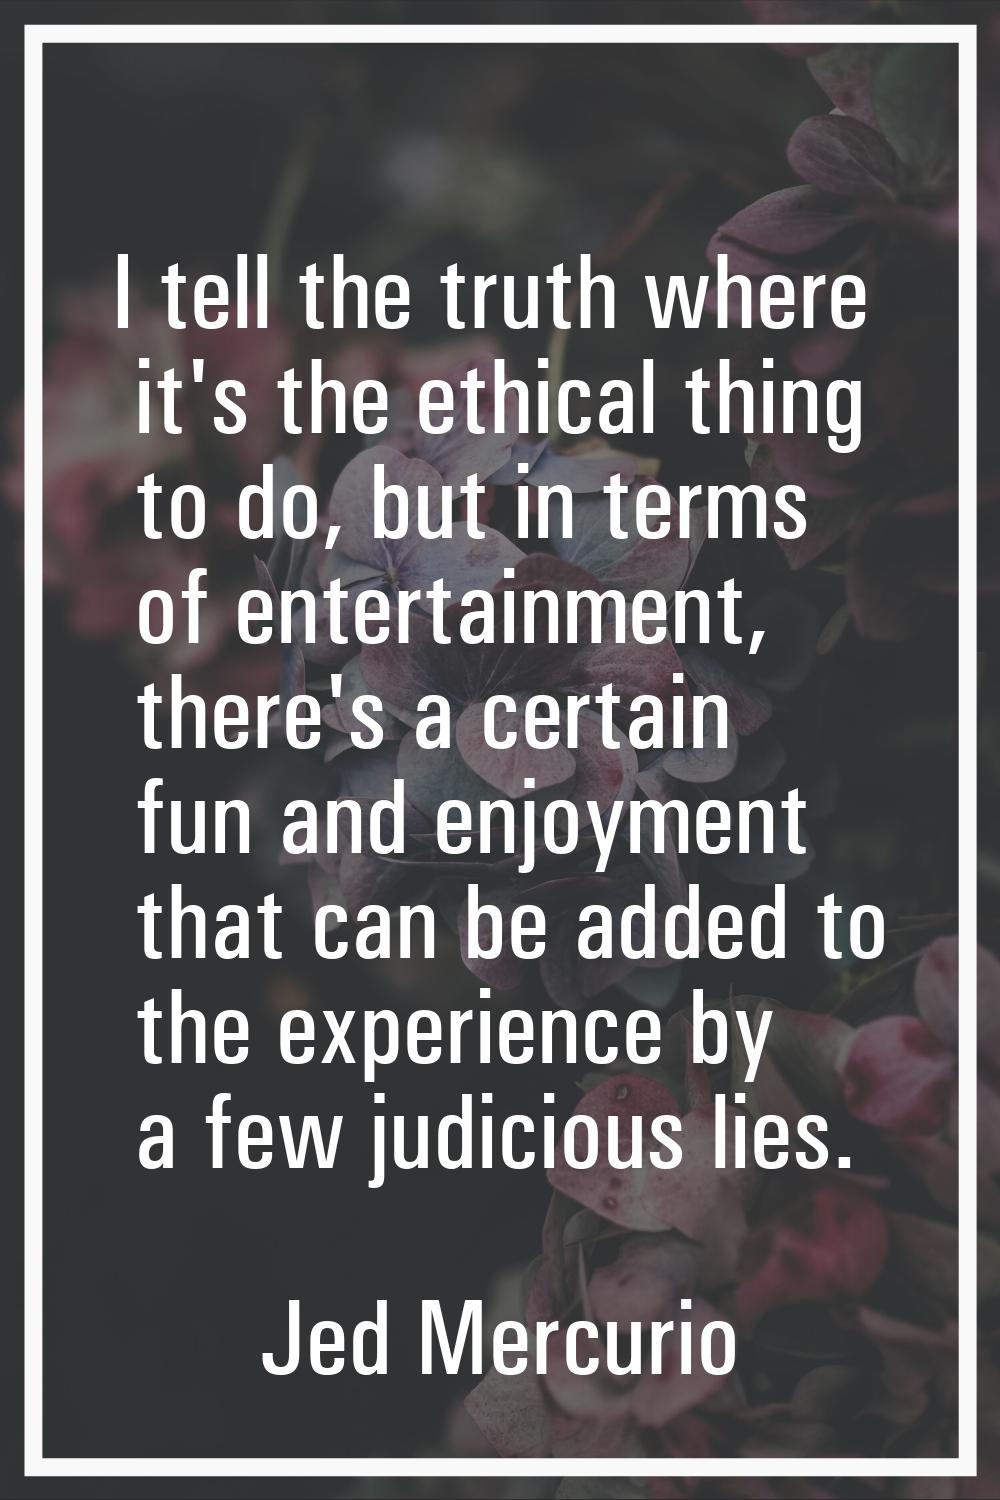 I tell the truth where it's the ethical thing to do, but in terms of entertainment, there's a certa